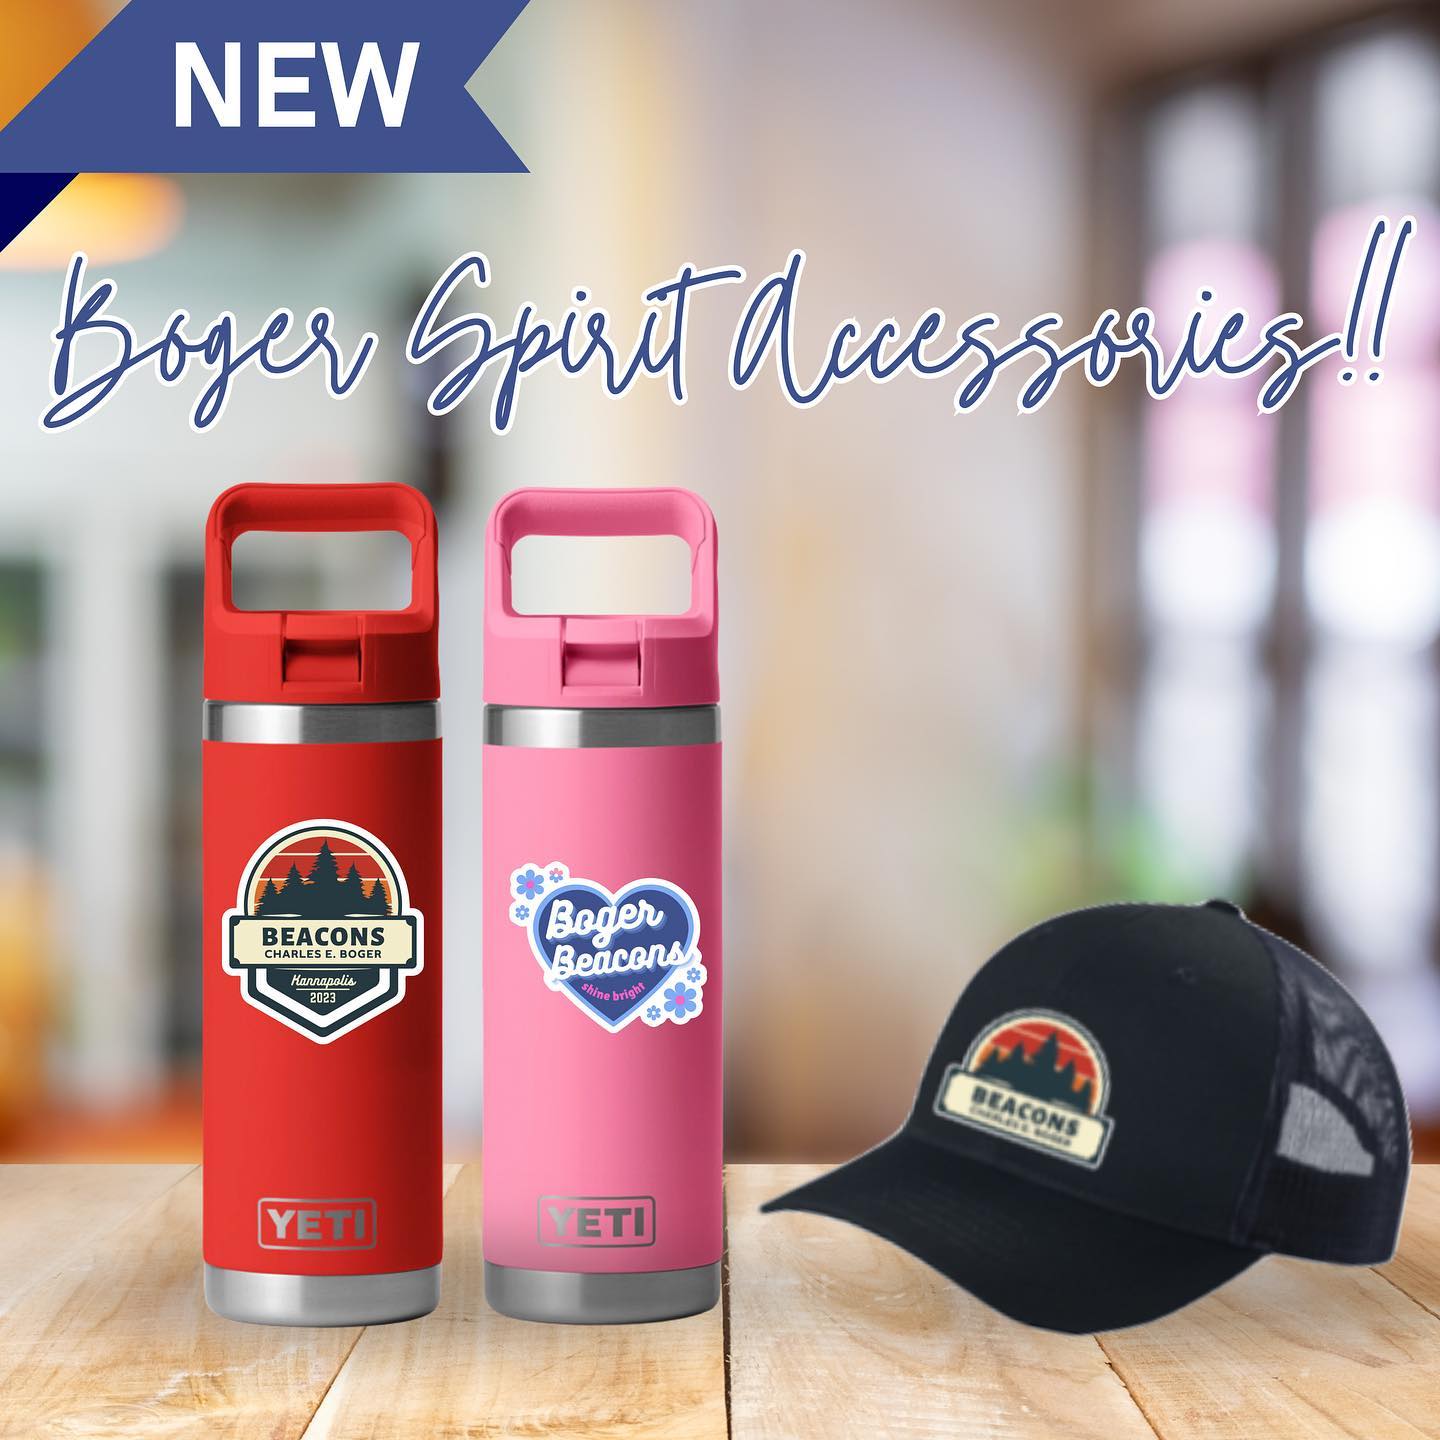 🥳Boger Spirit Accessories have arrived!!🥳

Stickers will be available in two fun Boger designs and our navy youth trucke